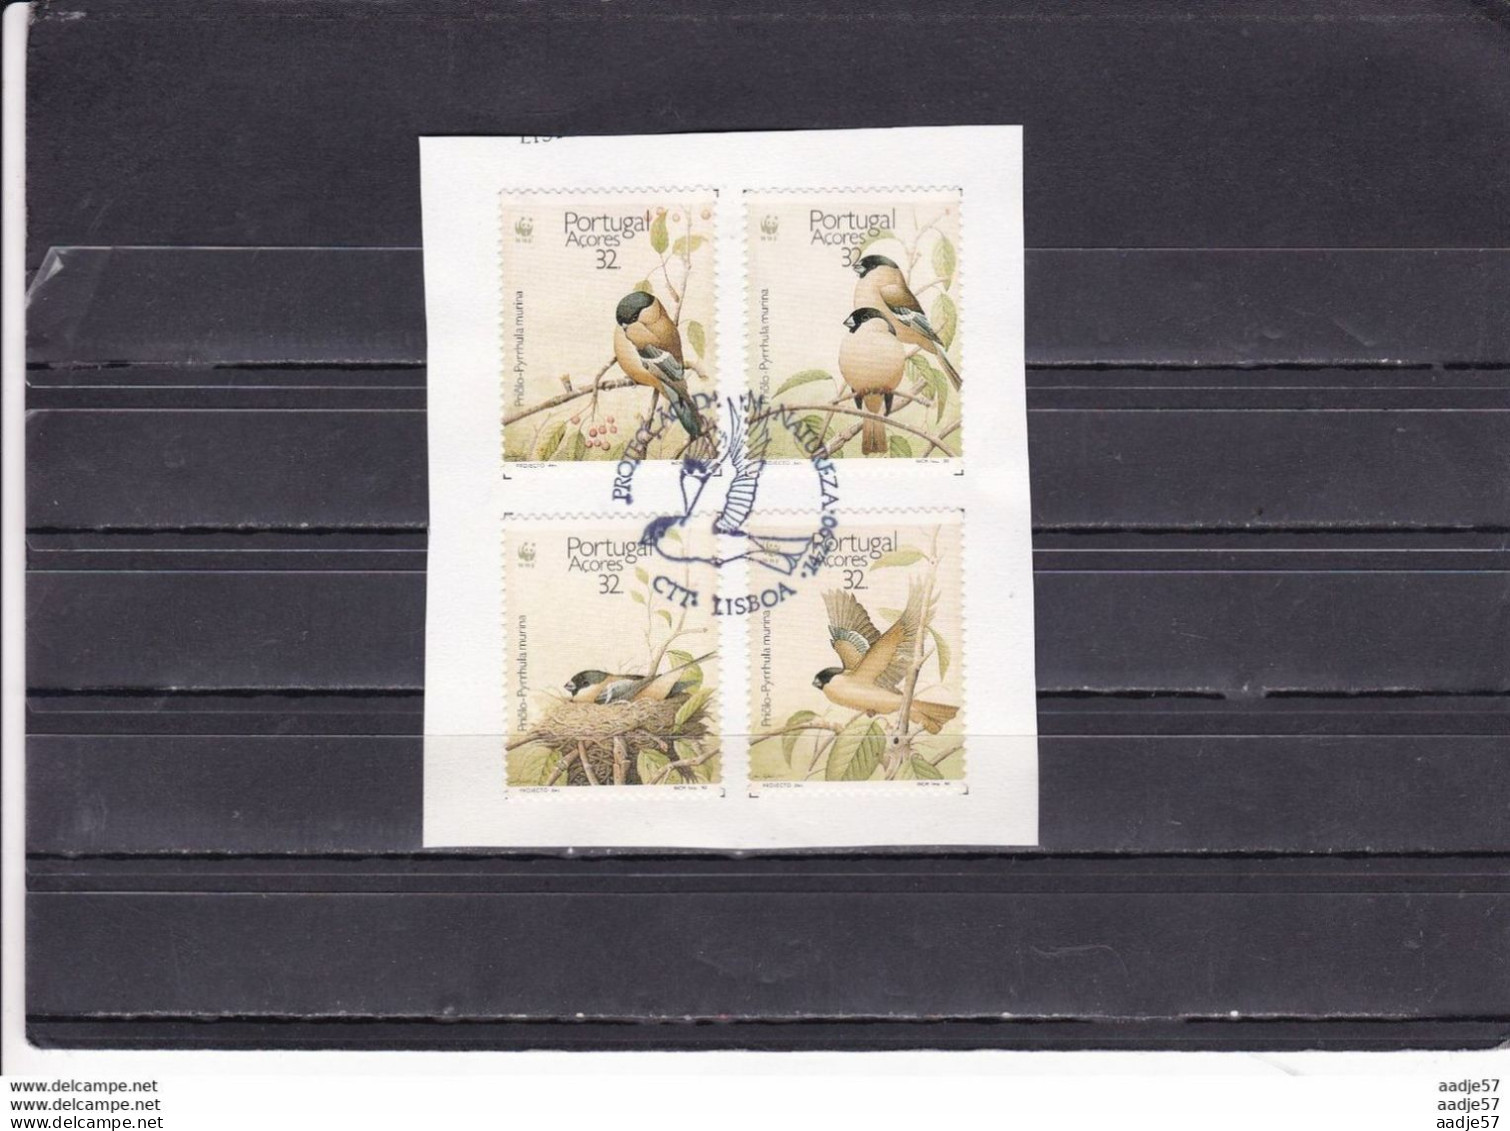 PORTUGAL ACORES 1990 Mi 405-408 , USED FDC Stamp - Moineaux